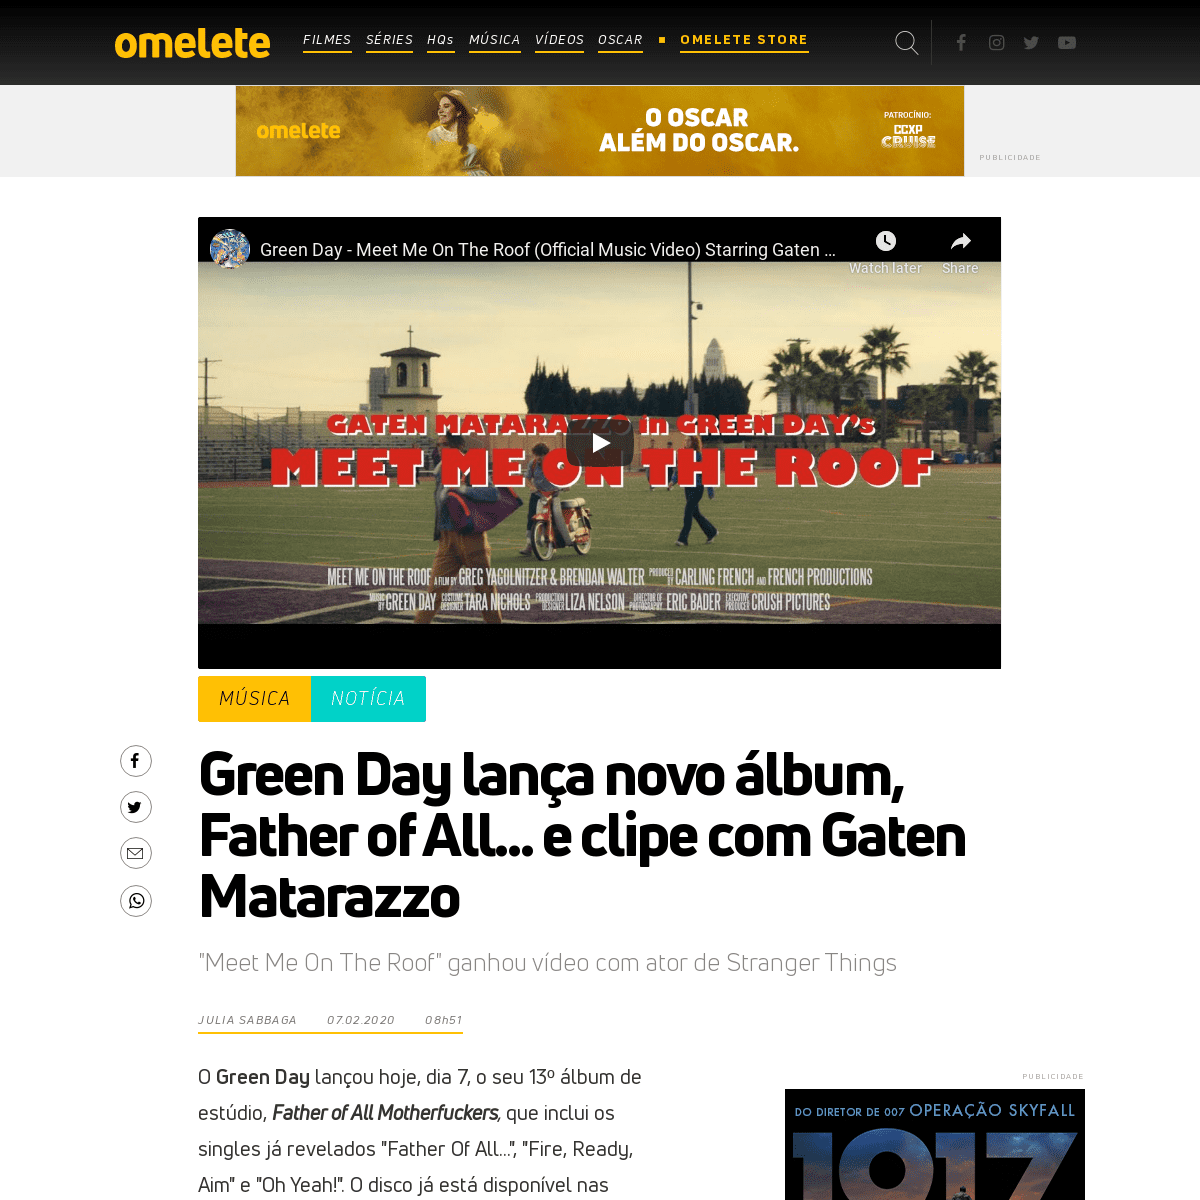 A complete backup of www.omelete.com.br/green-day/green-day-father-of-all-album-lancamento